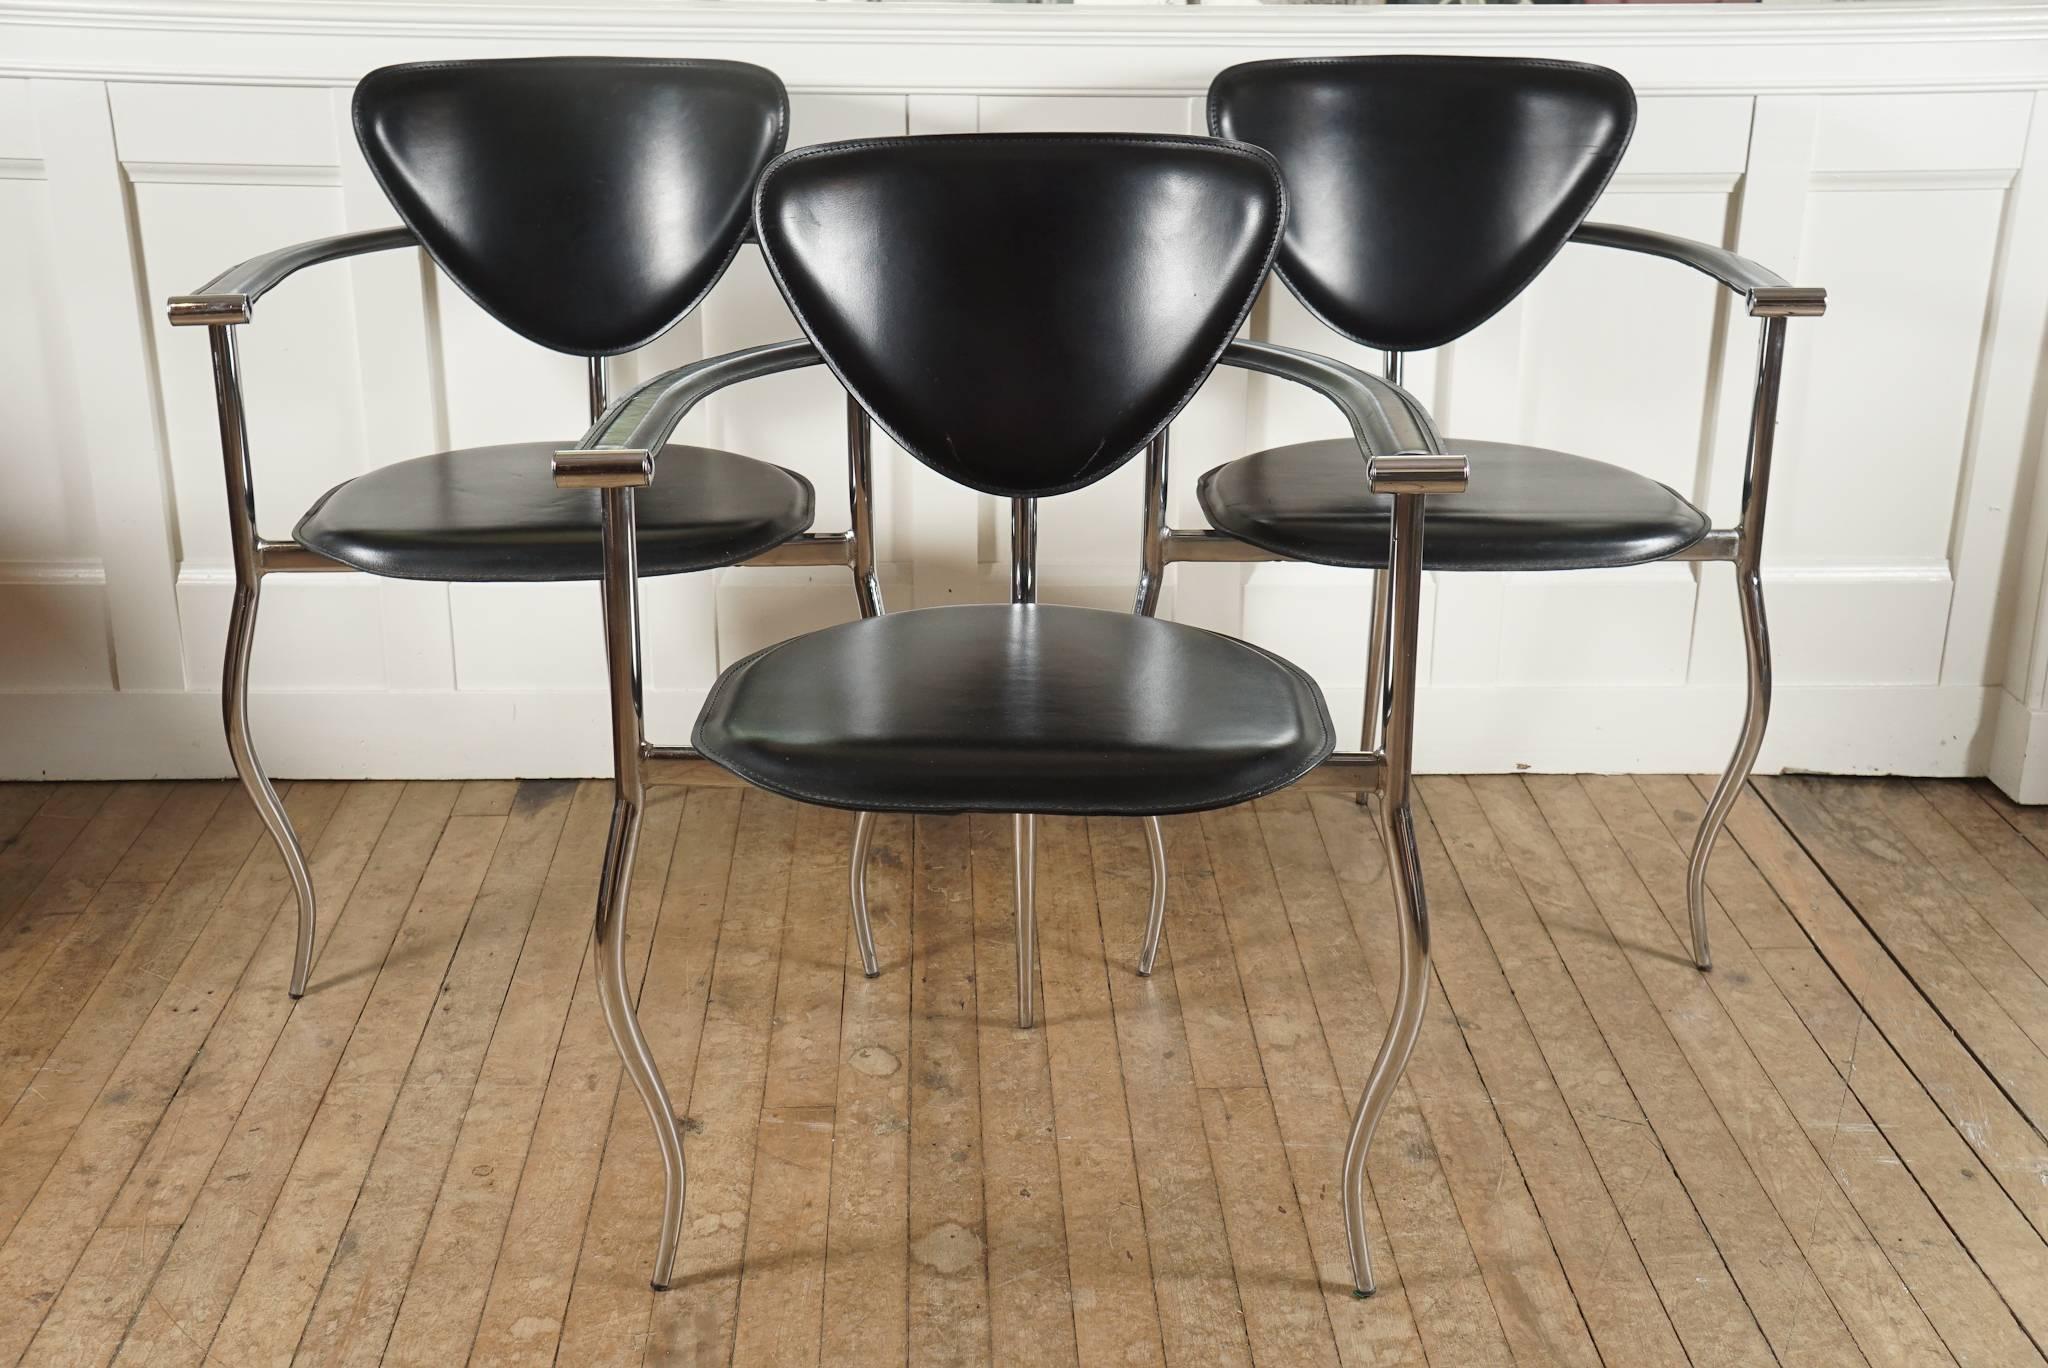 Set of six Arrben Stiletto armchairs, chrome frame, cabriole legs, knuckle arm, stitched black leather seat with triangular back.